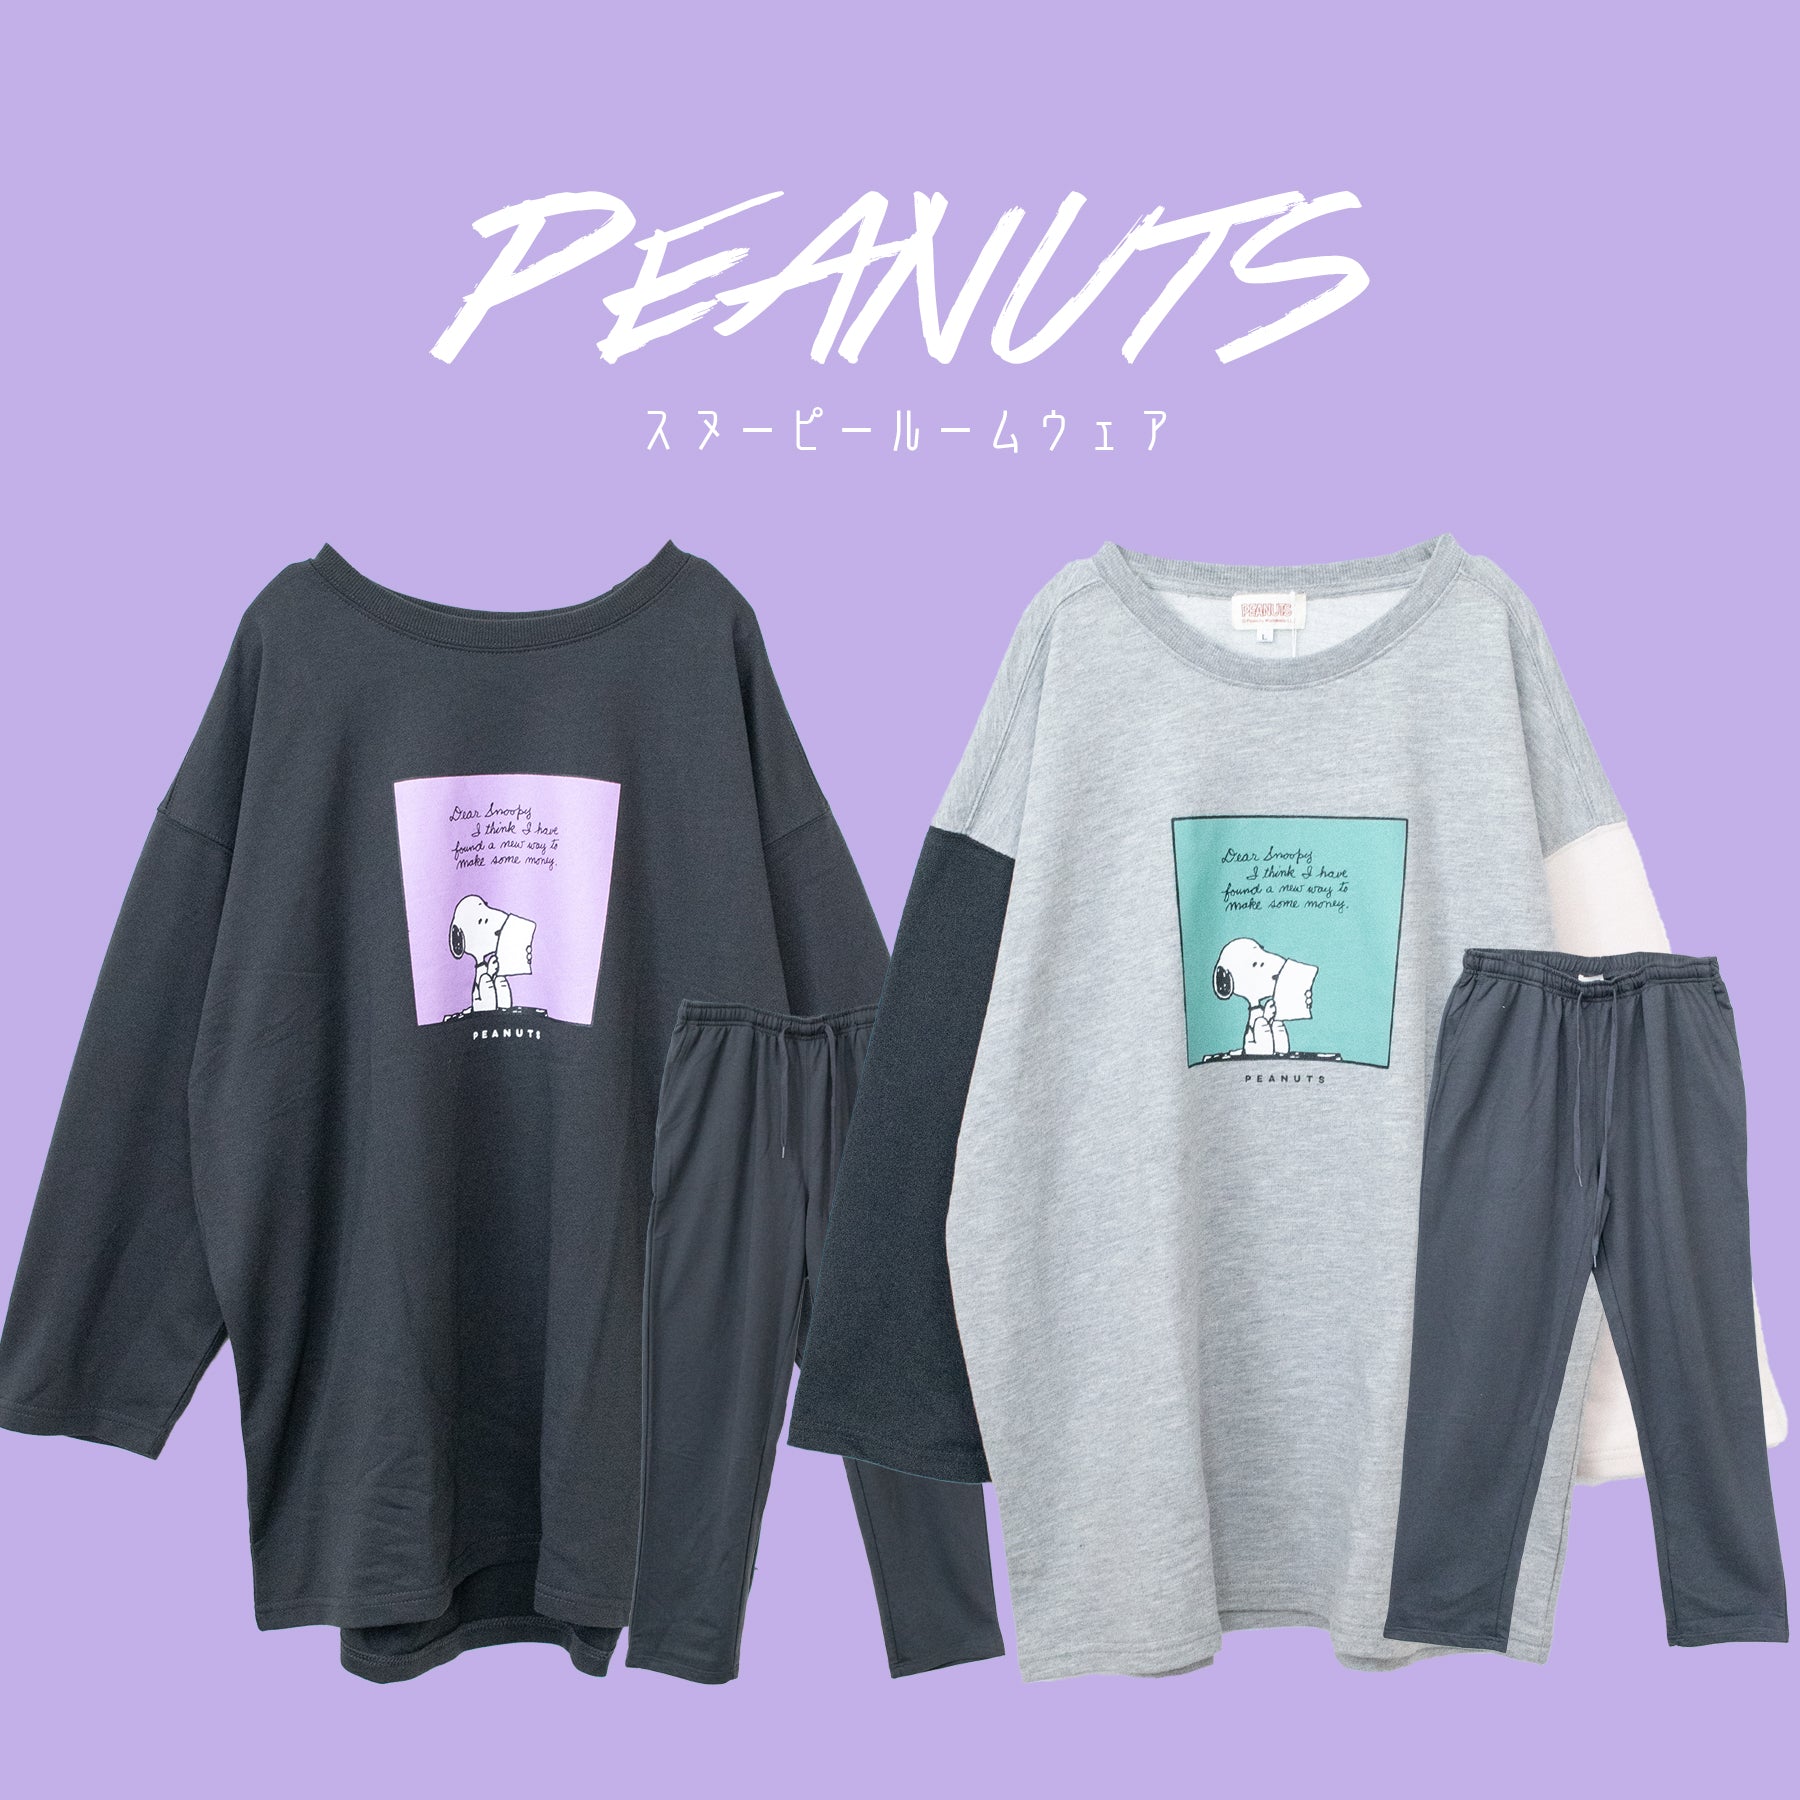 PEANUTS Snoopy Room Wear Setup - YOUAREMYPOISON